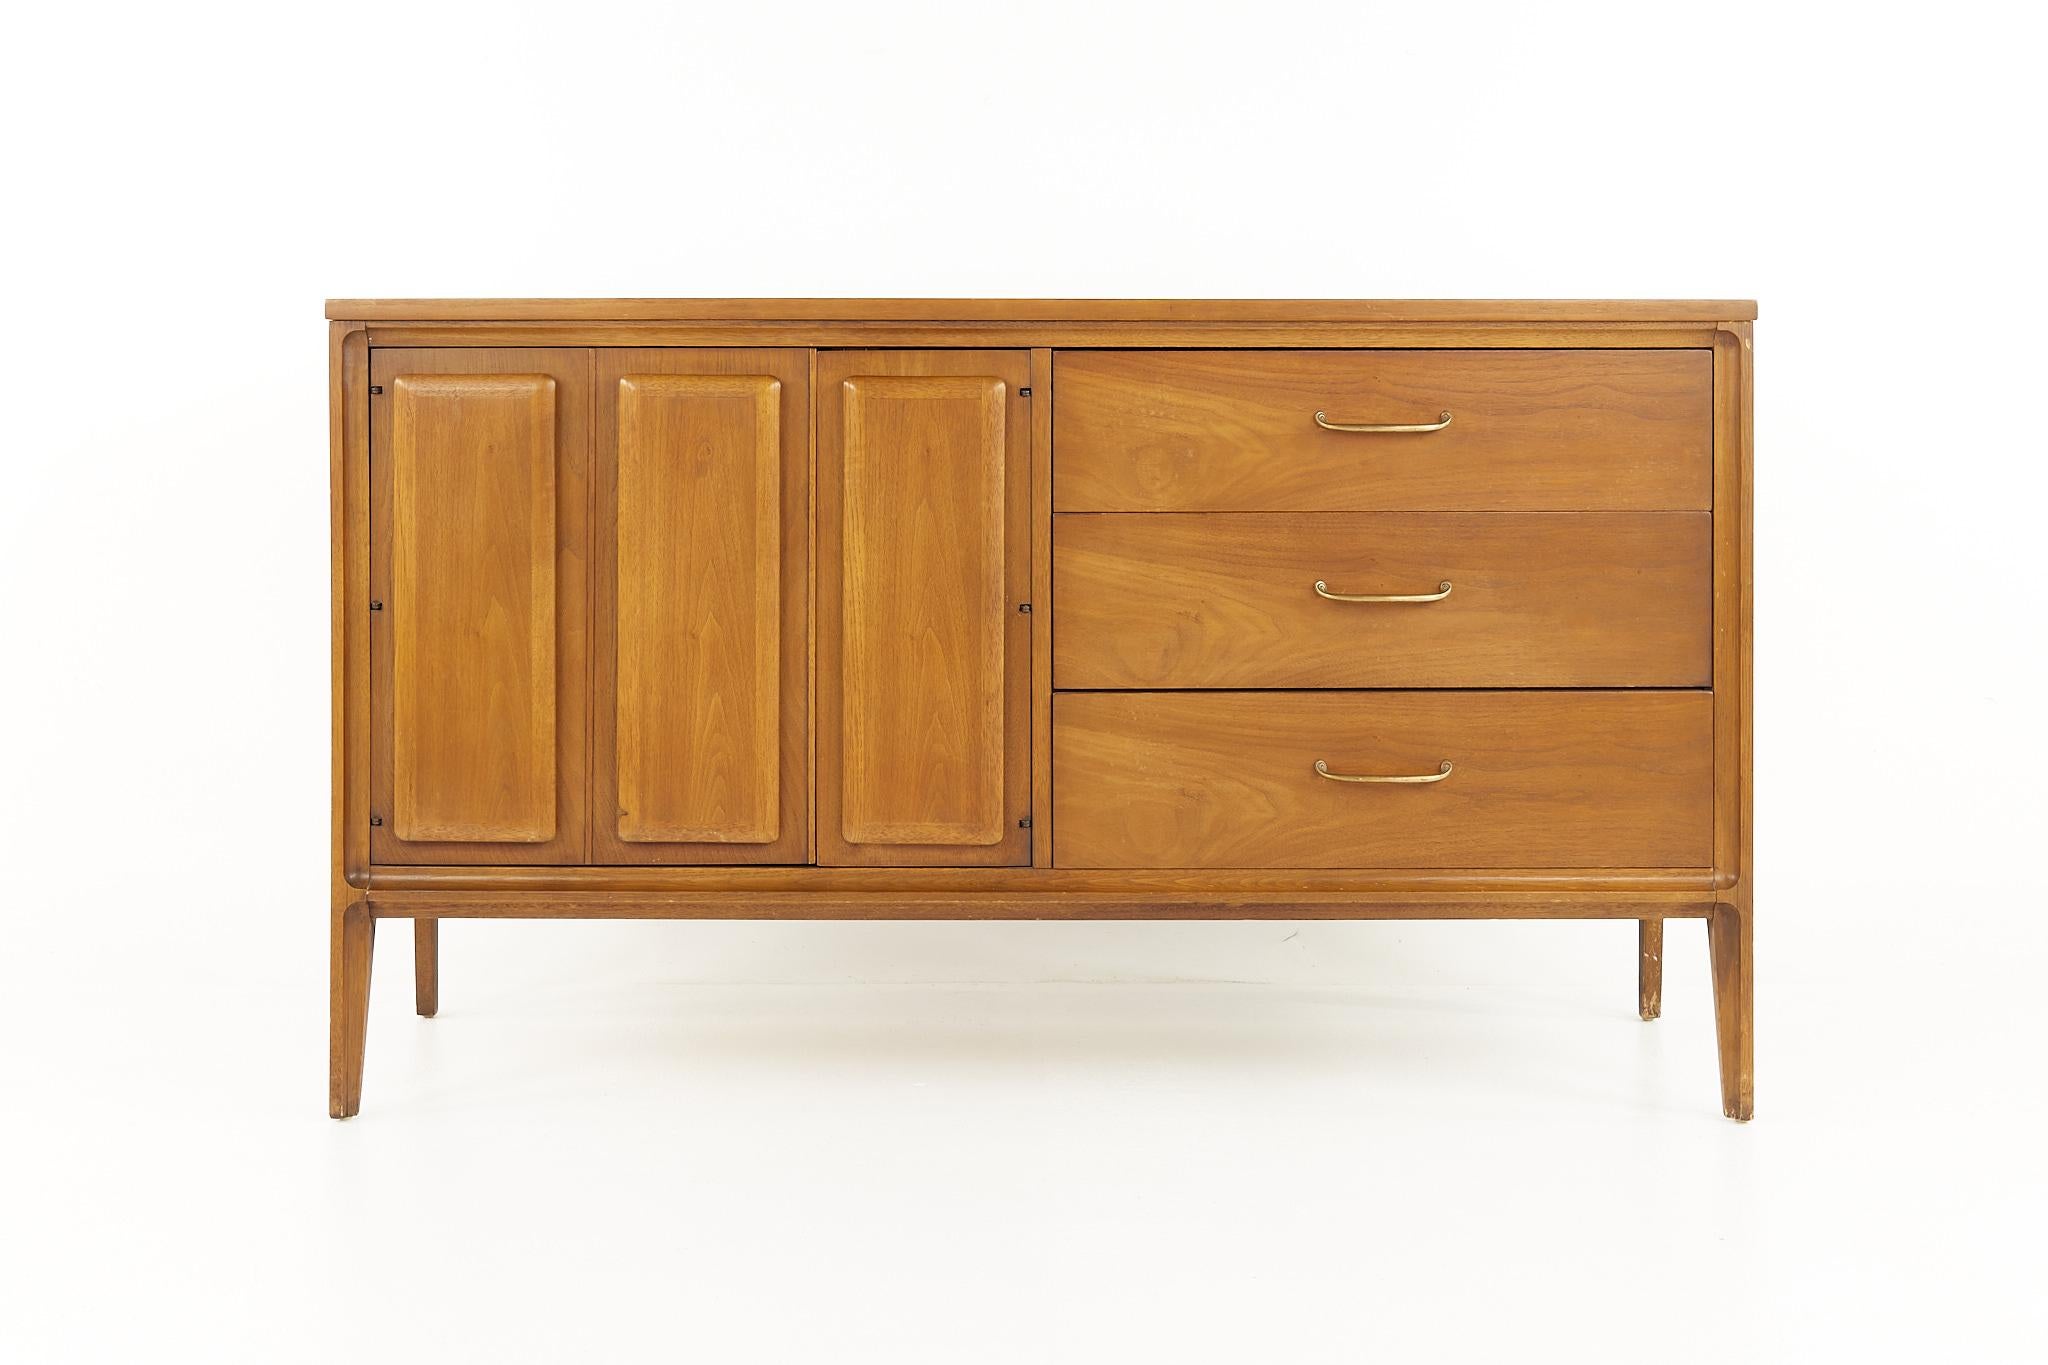 Broyhill Forward '70 mid century walnut sideboard credenza

This credenza measures: 54 wide x 18 deep x 31.5 inches high

All pieces of furniture can be had in what we call restored vintage condition. That means the piece is restored upon